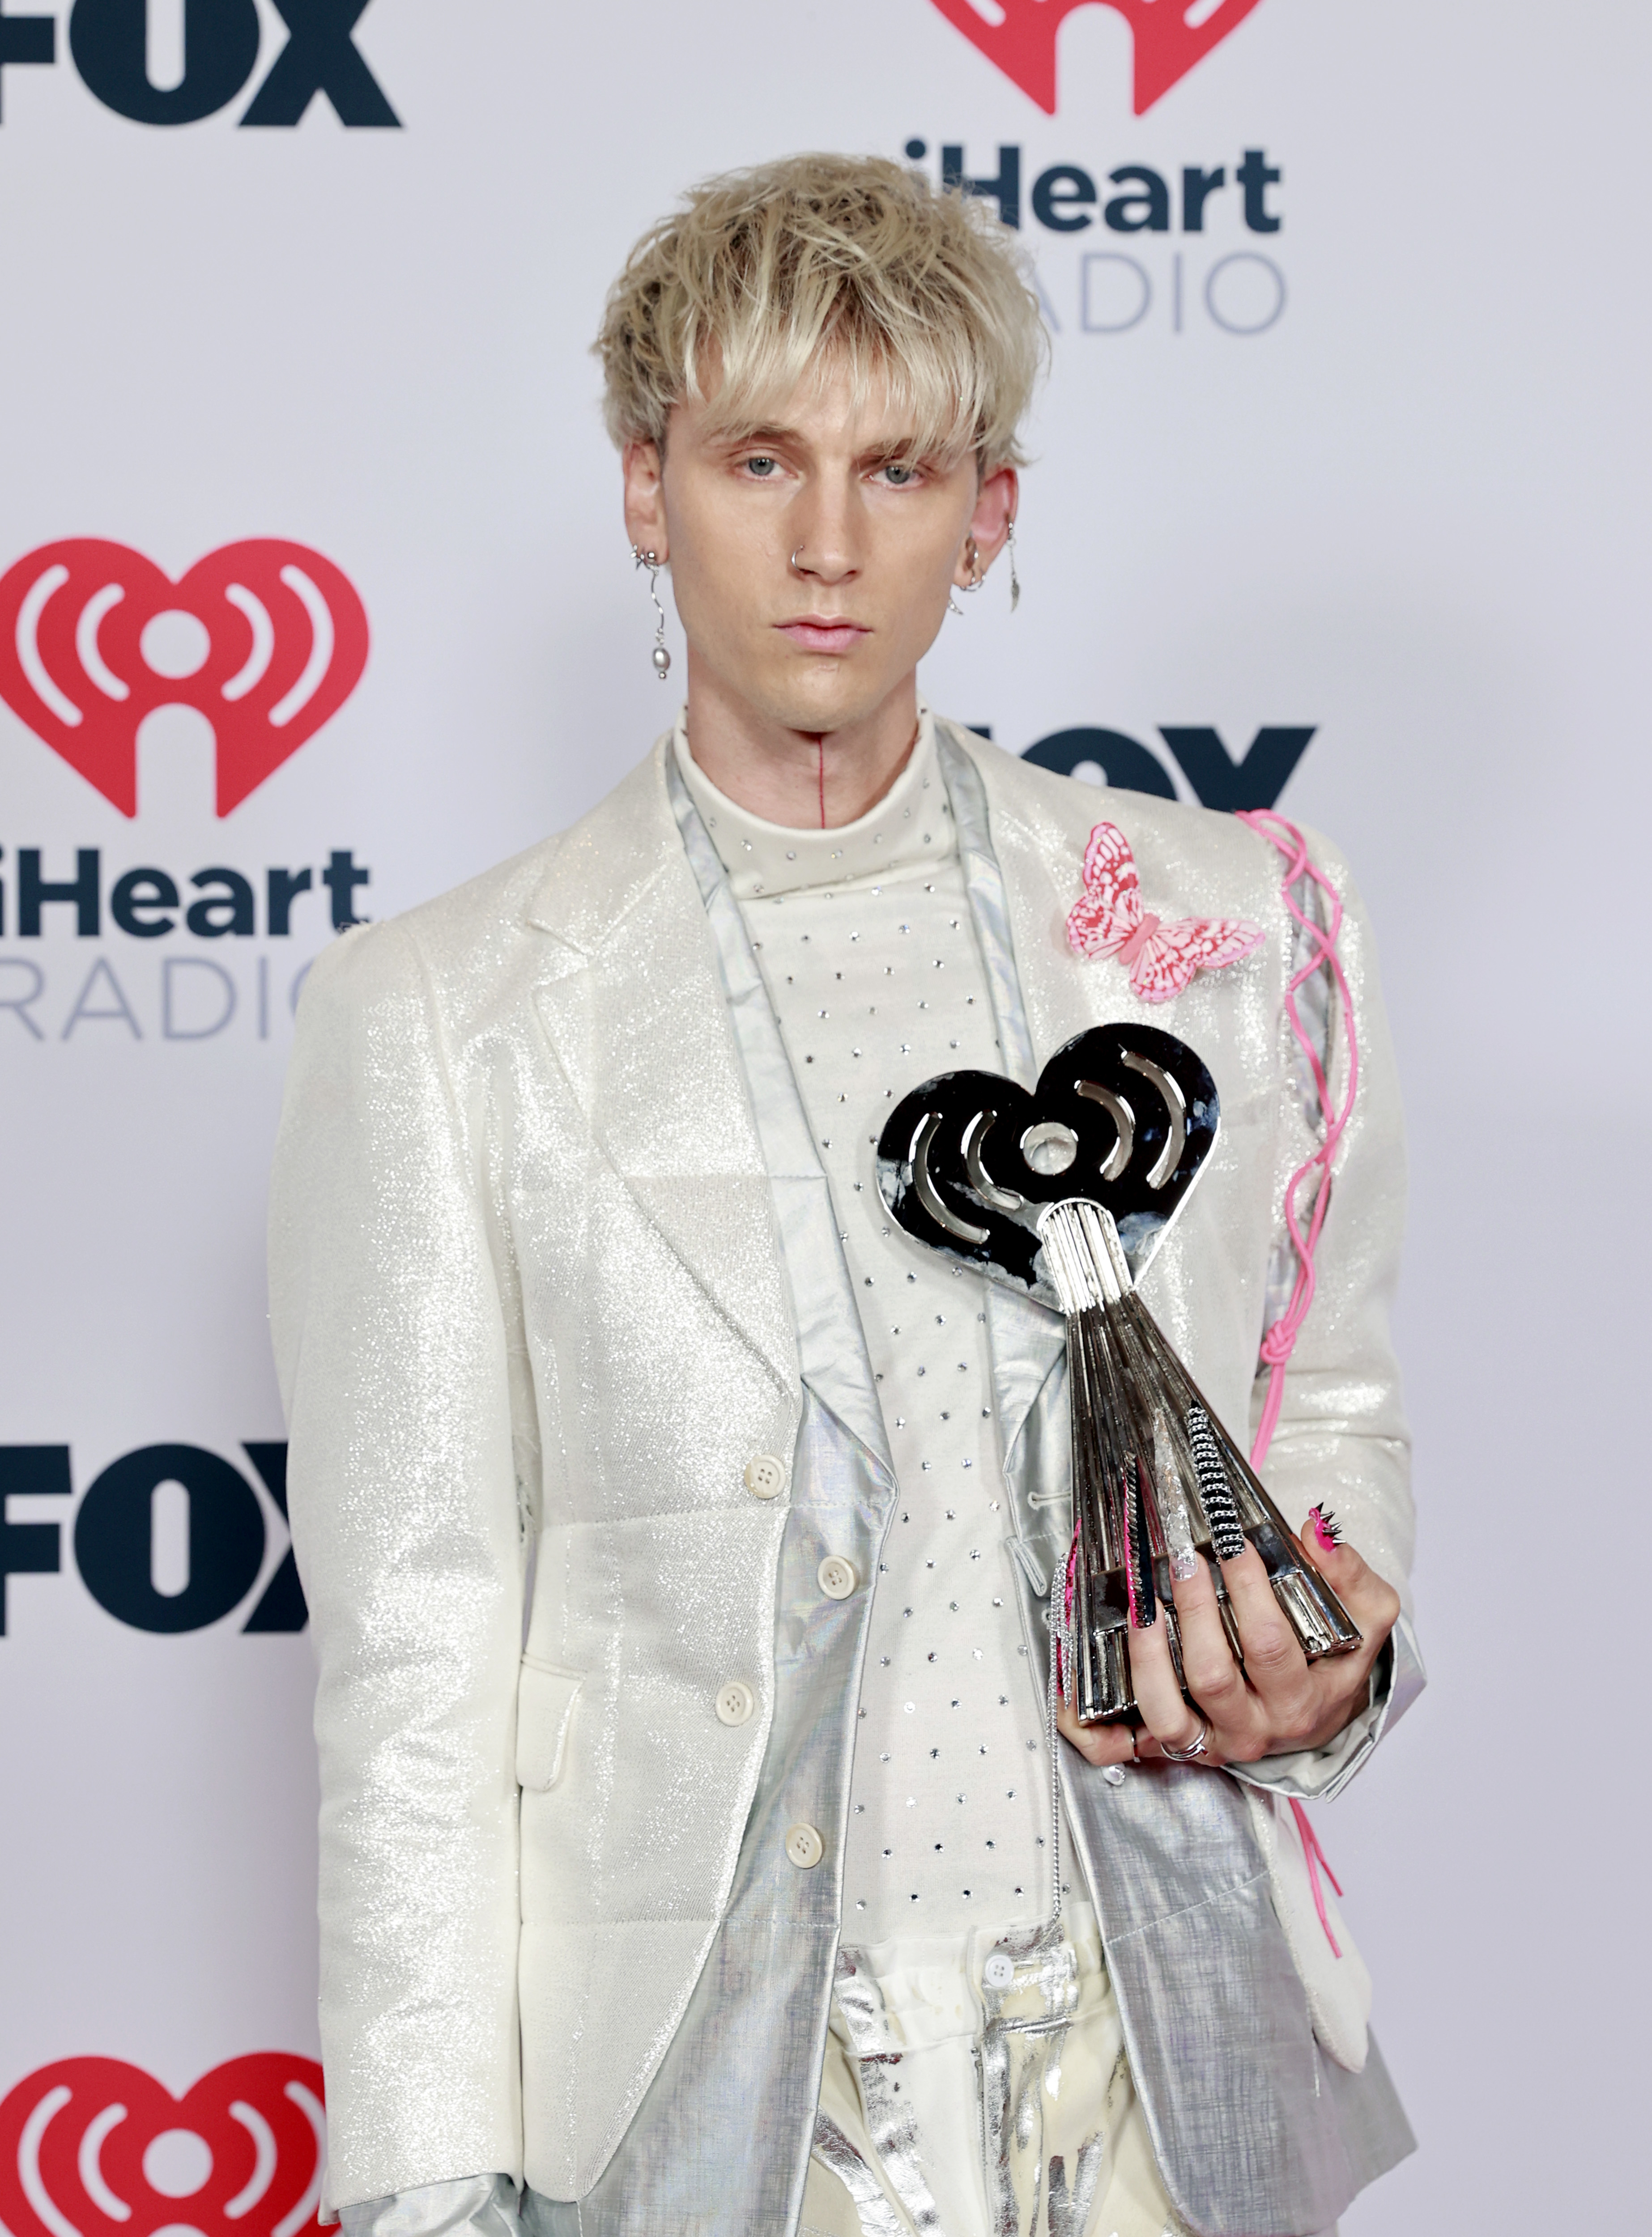 Machine Gun Kelly in a silver patterned suit holding an award